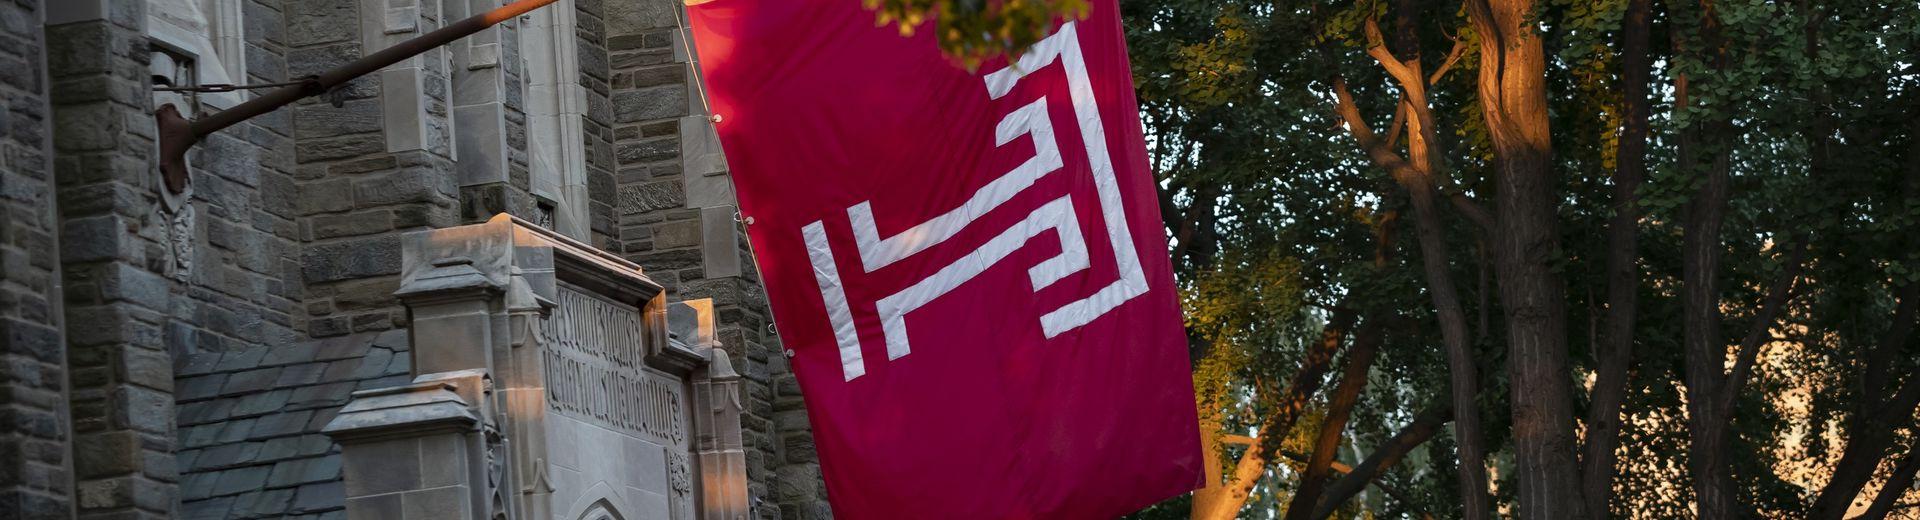 The cherry red Temple T flag hanging outside of Sullivan Hall on Main Campus